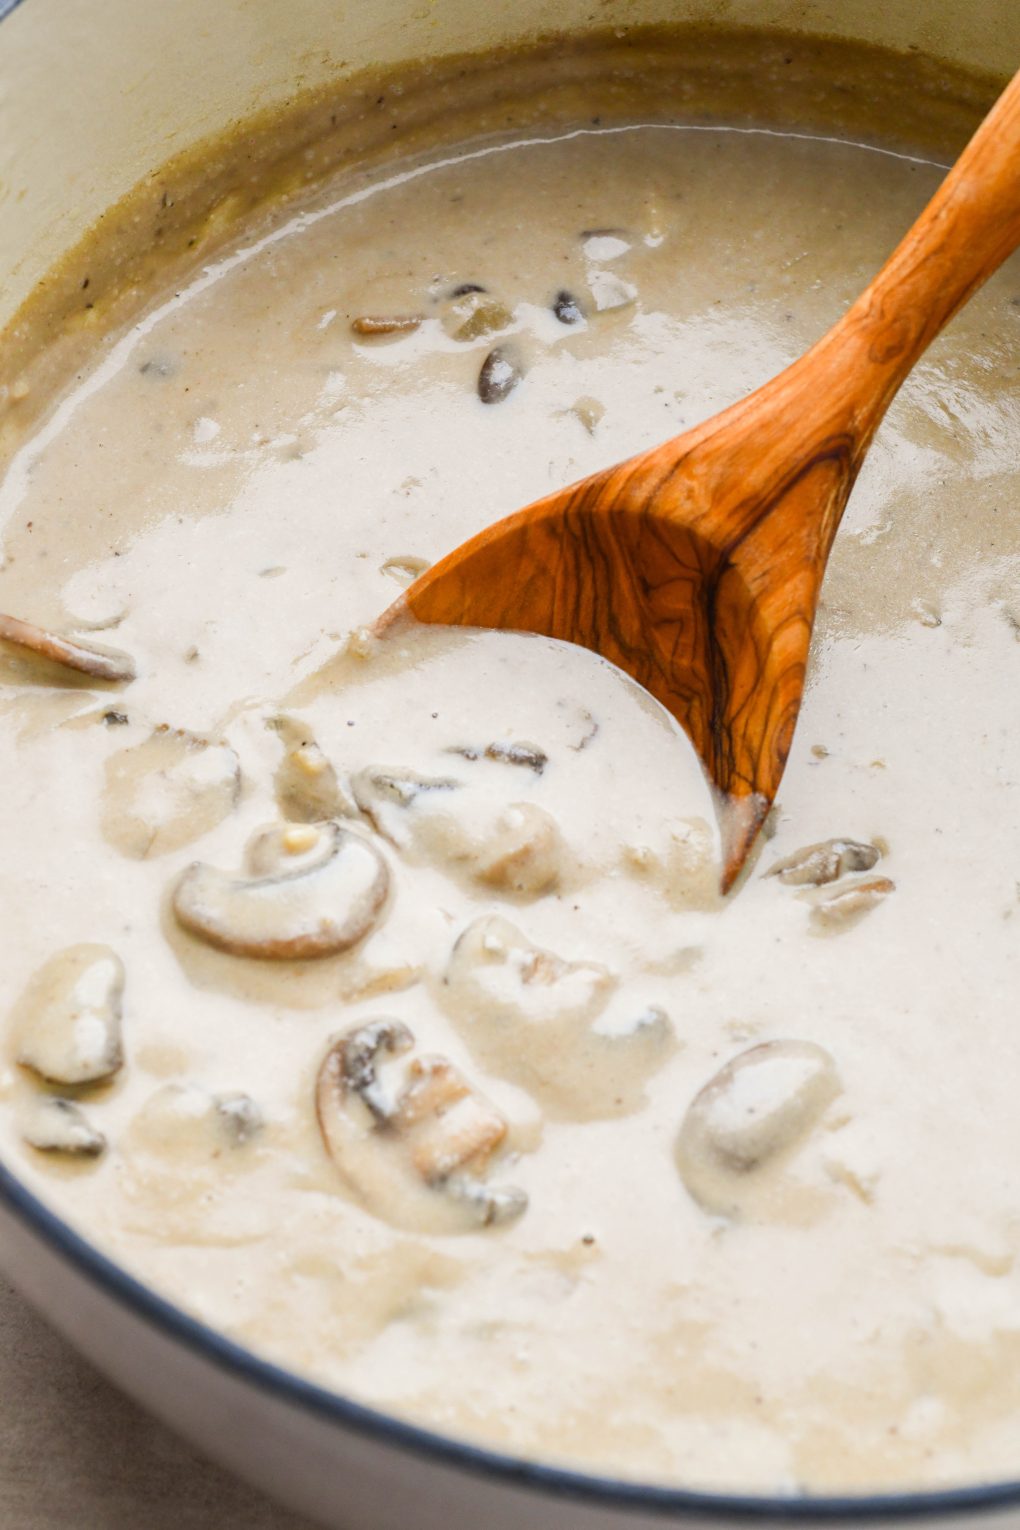 Step by step images for how to make homemade cream of mushroom soup: Creamy blended soup in a large white ceramic soup pot.